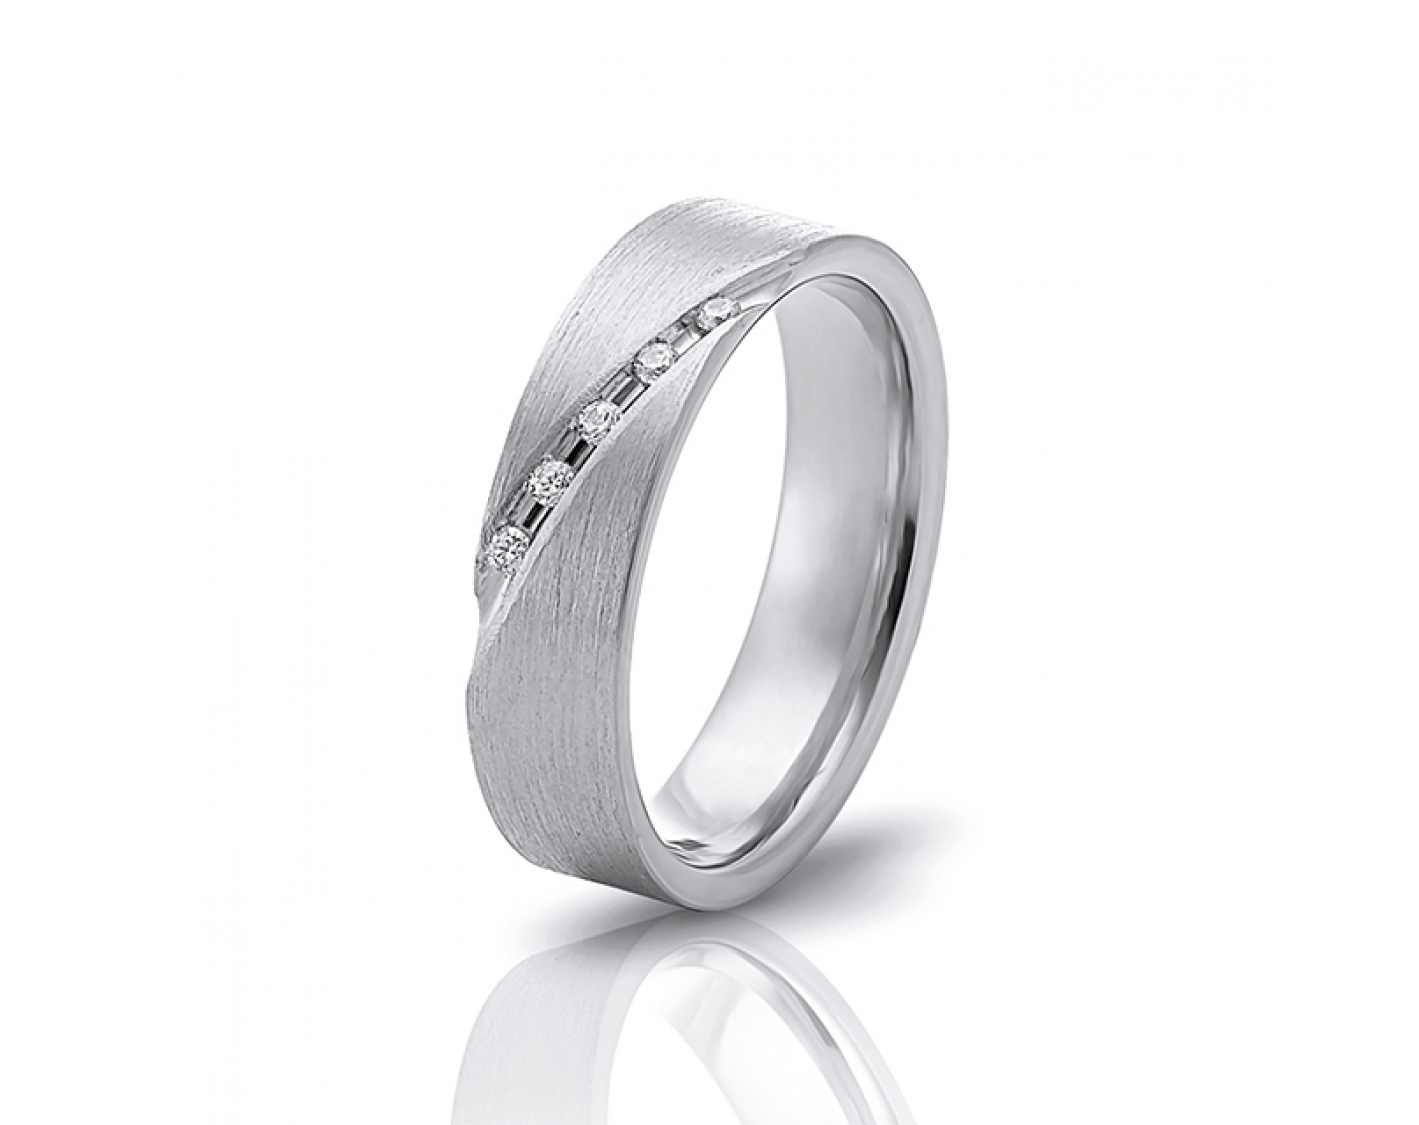 18k white gold 5mm matte wedding band with diagonal line and diamonds